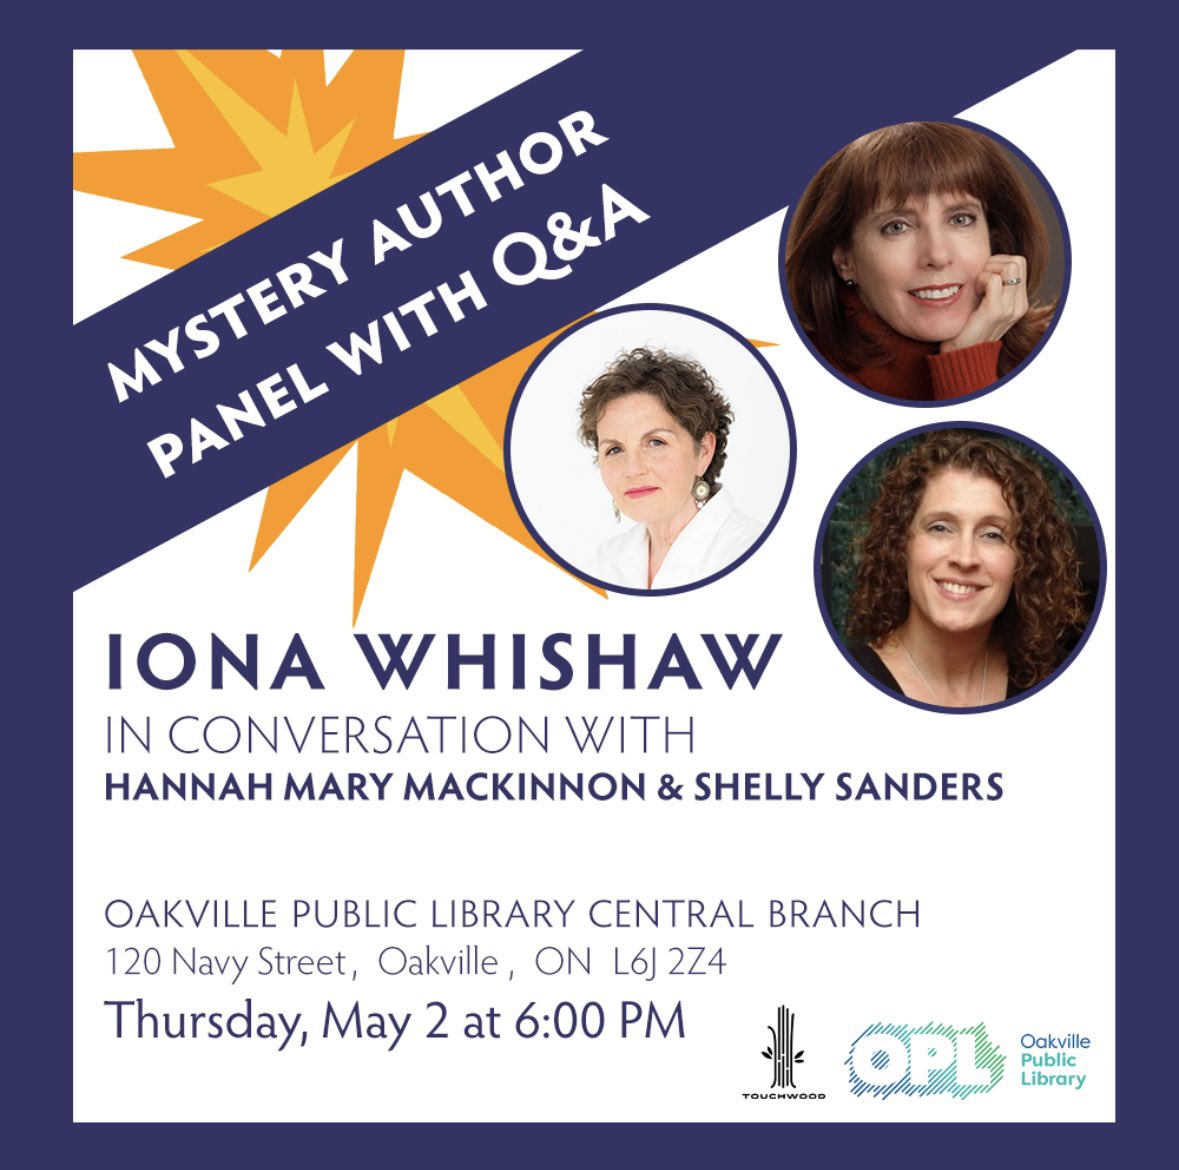 One week today, May 2, join me and #bestsellingauthors Iona Whishaw & Hannah Mary Mackinnon for a chat about #writing #mystery novels! @OakvilleLibrary 6 pm Central Branch #librariesrock #authors #writerslife